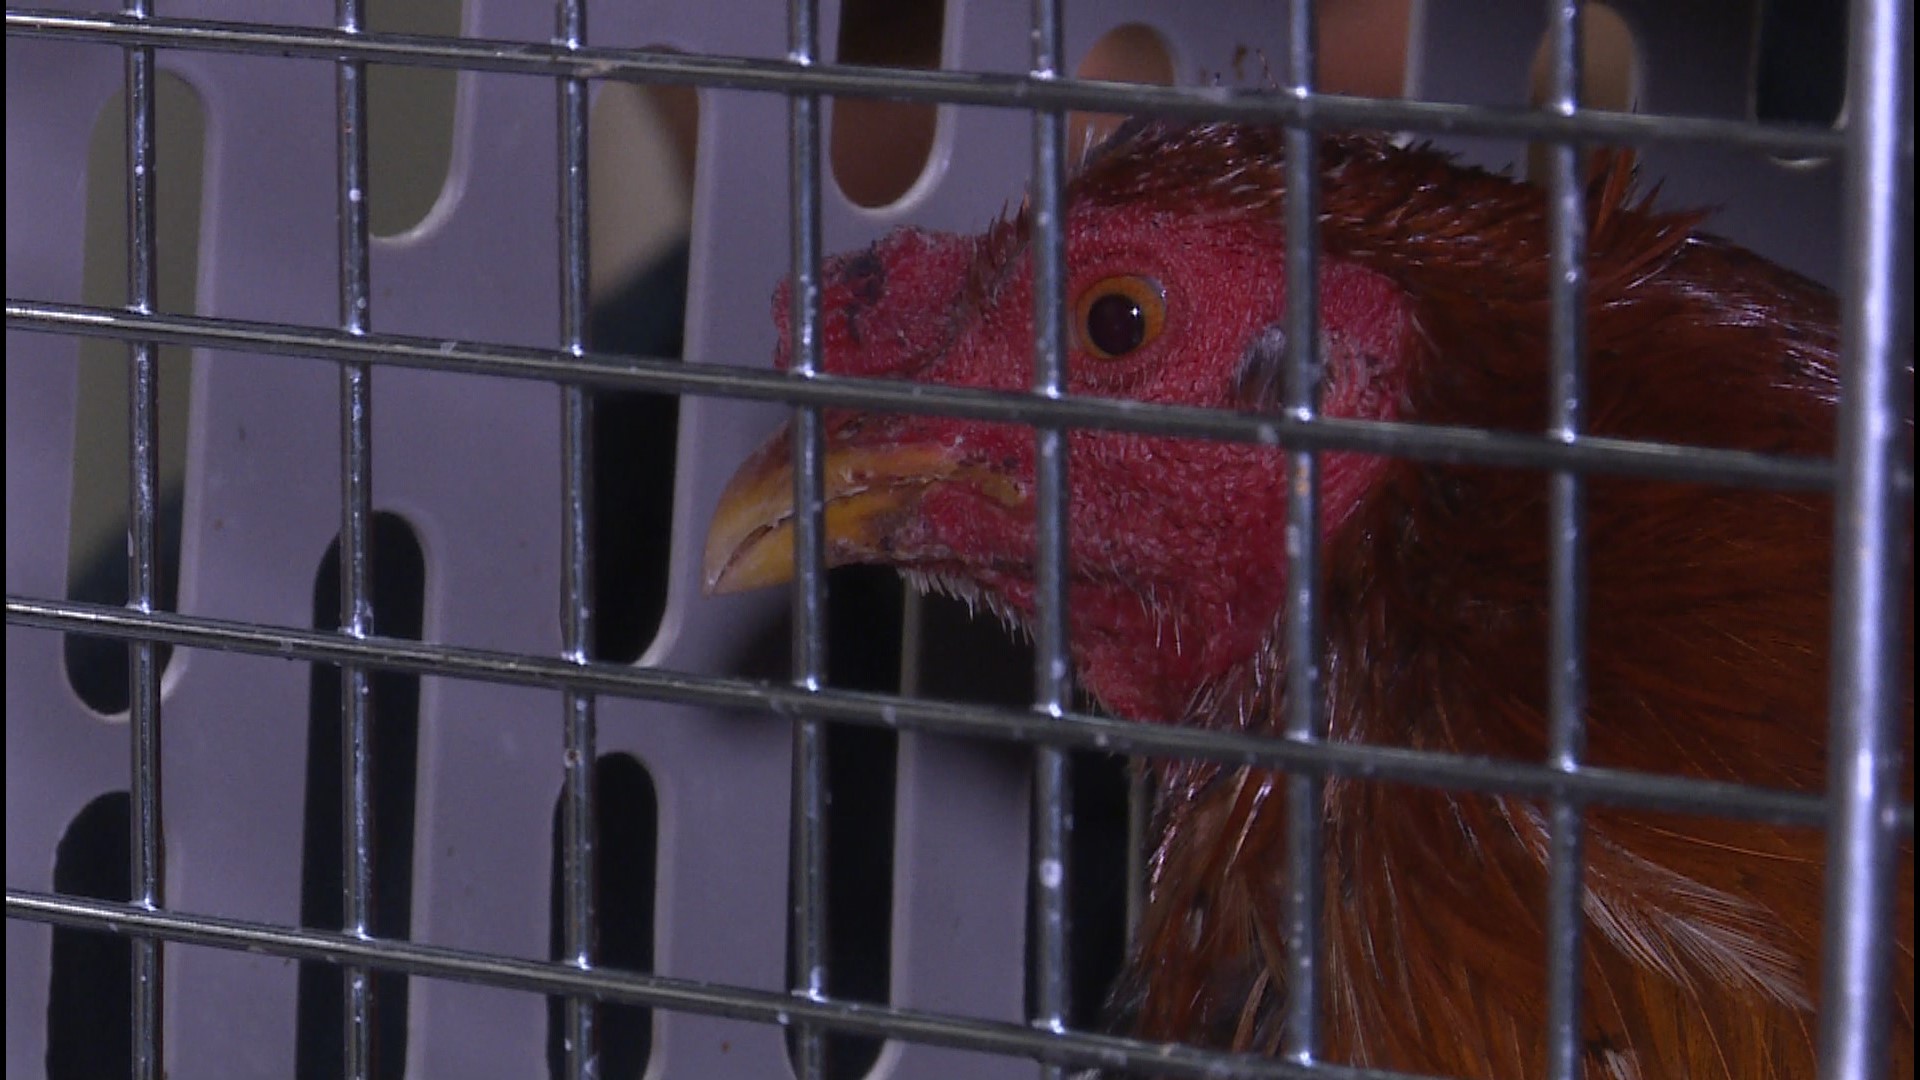 The Putnam County Sheriff's Office says about 200 chickens were seized after uncovering the breeding and training facility on Lettie Lane.